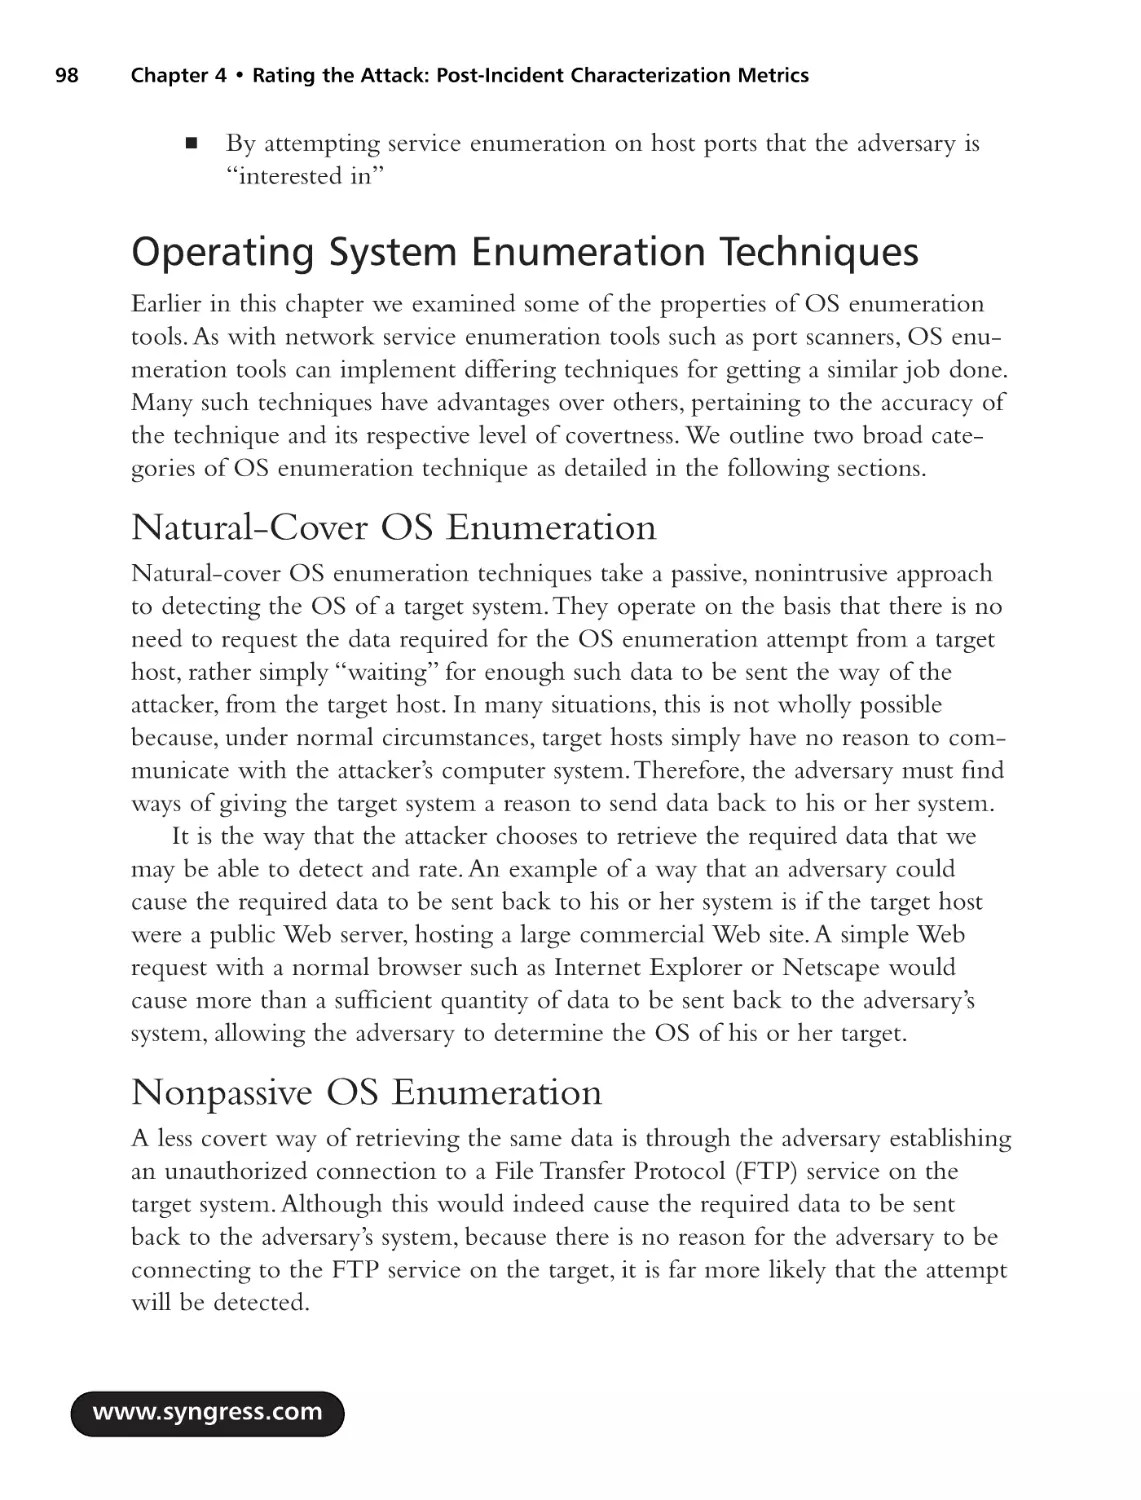 Operating System Enumeration Techniques
Natural-Cover OS Enumeration
Nonpassive OS Enumeration